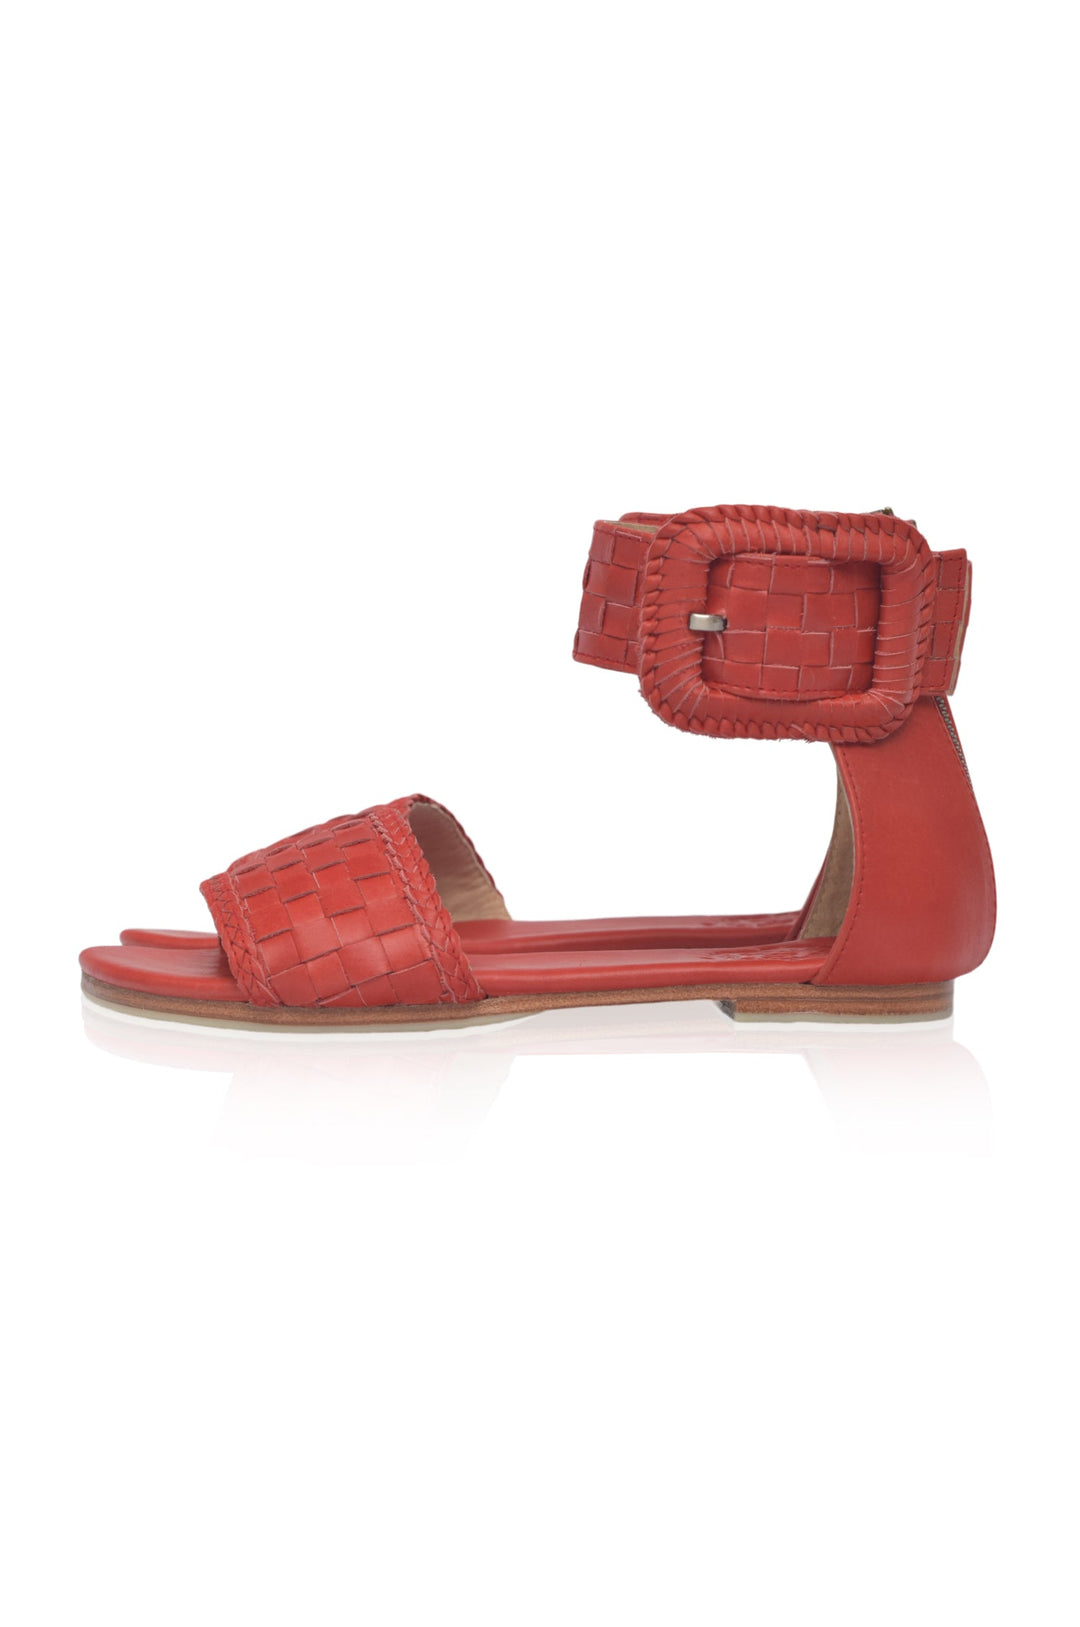 Madagascar Woven Leather Sandals by ELF